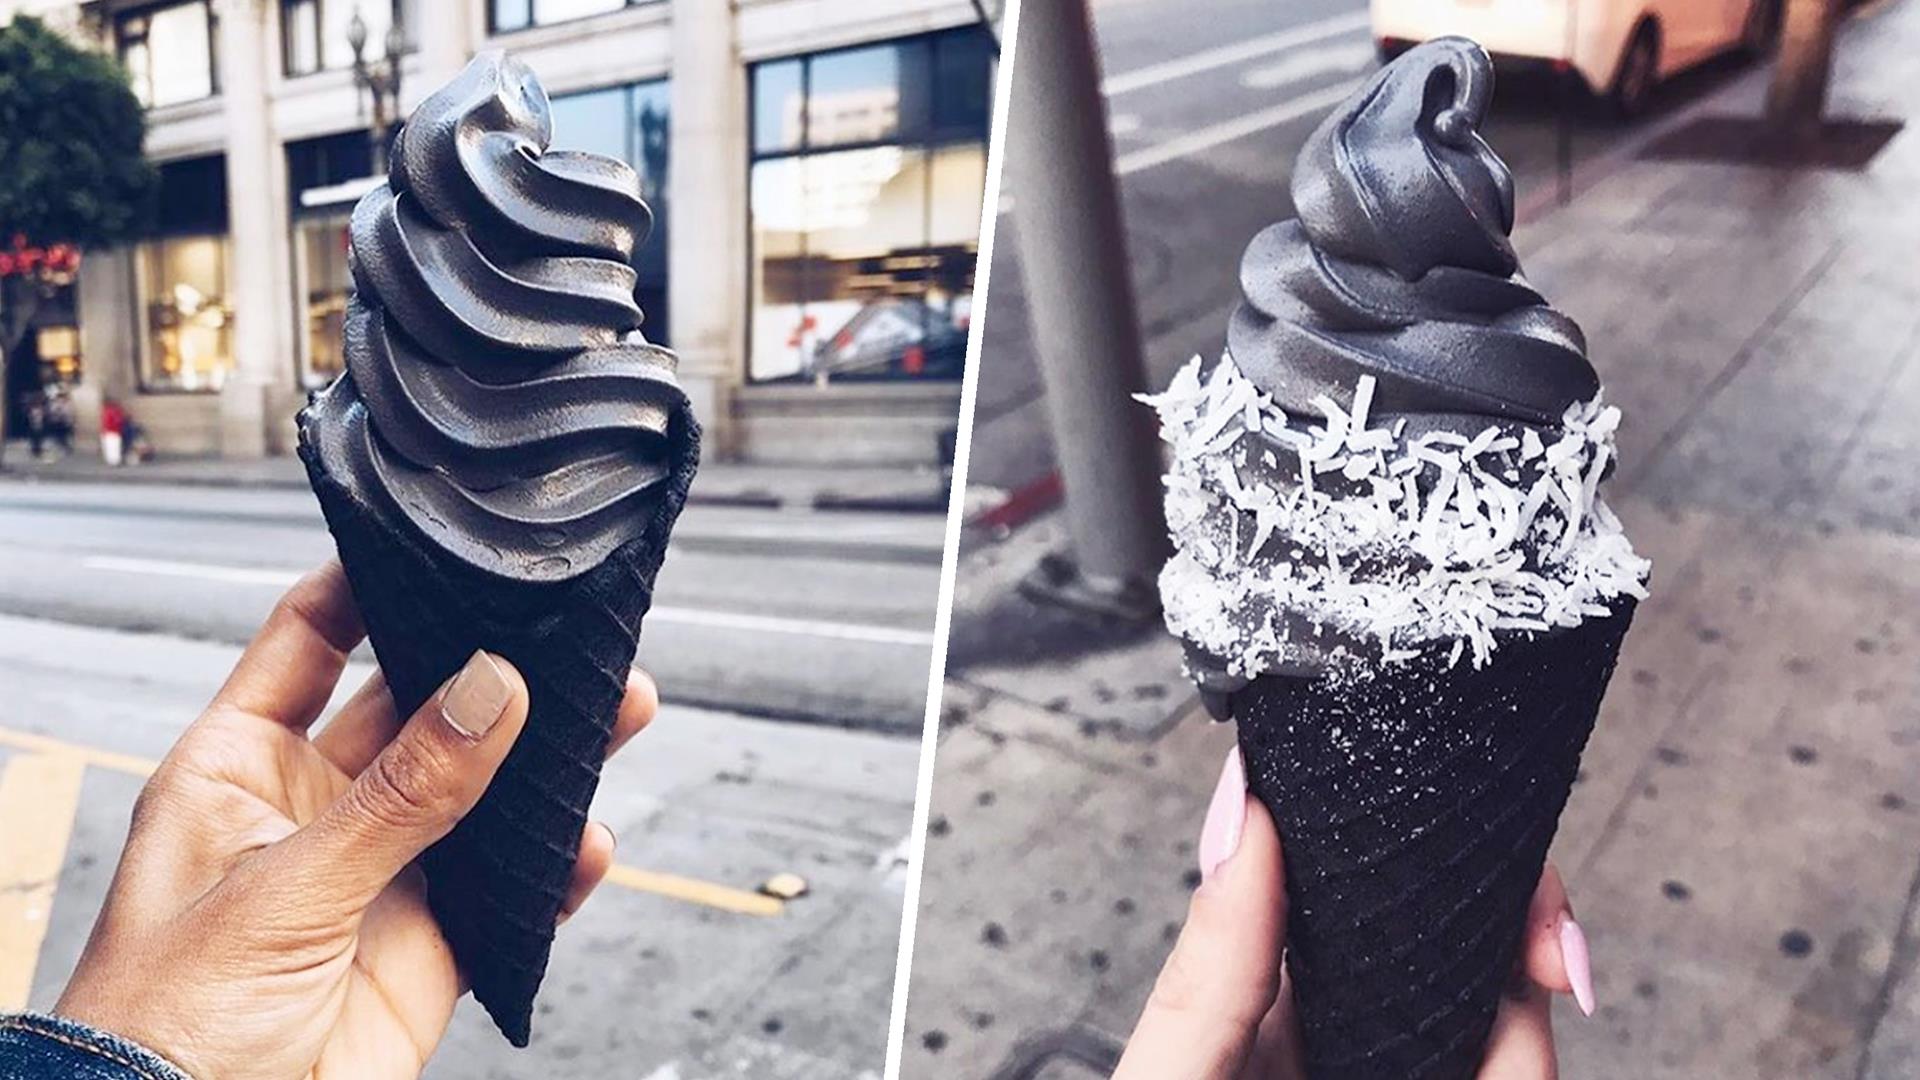 Goth Black Ice Cream at Little Damage in Los Angeles